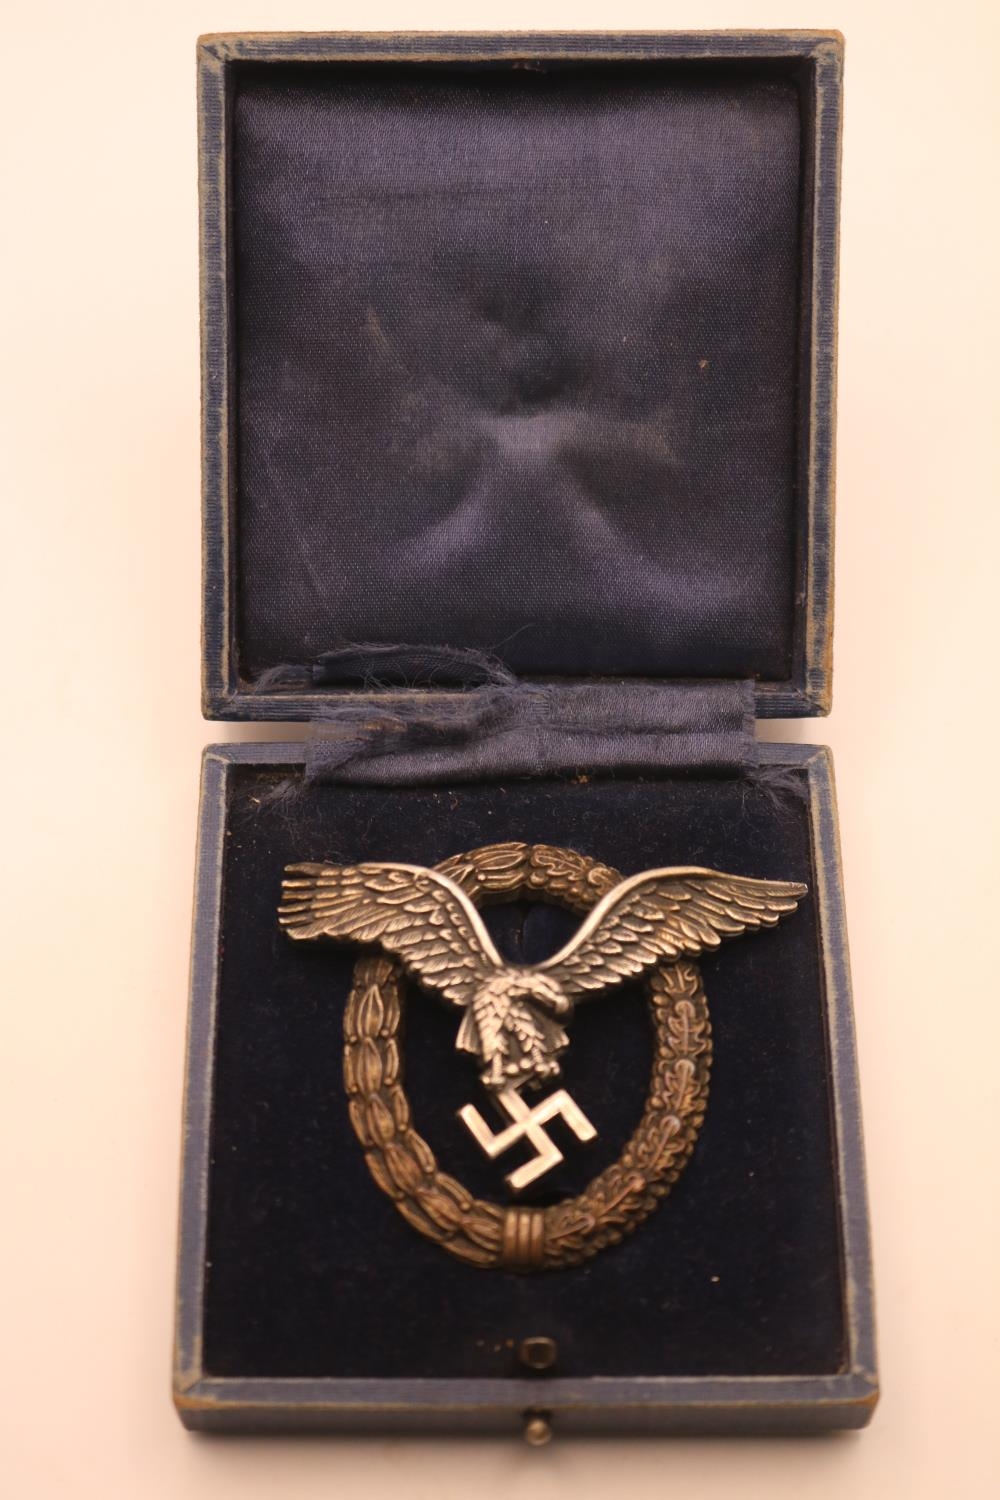 Luftwaffe Pilots Badge by C E Juncker in Original Box of Issue. Good quality two piece example of - Bild 2 aus 6